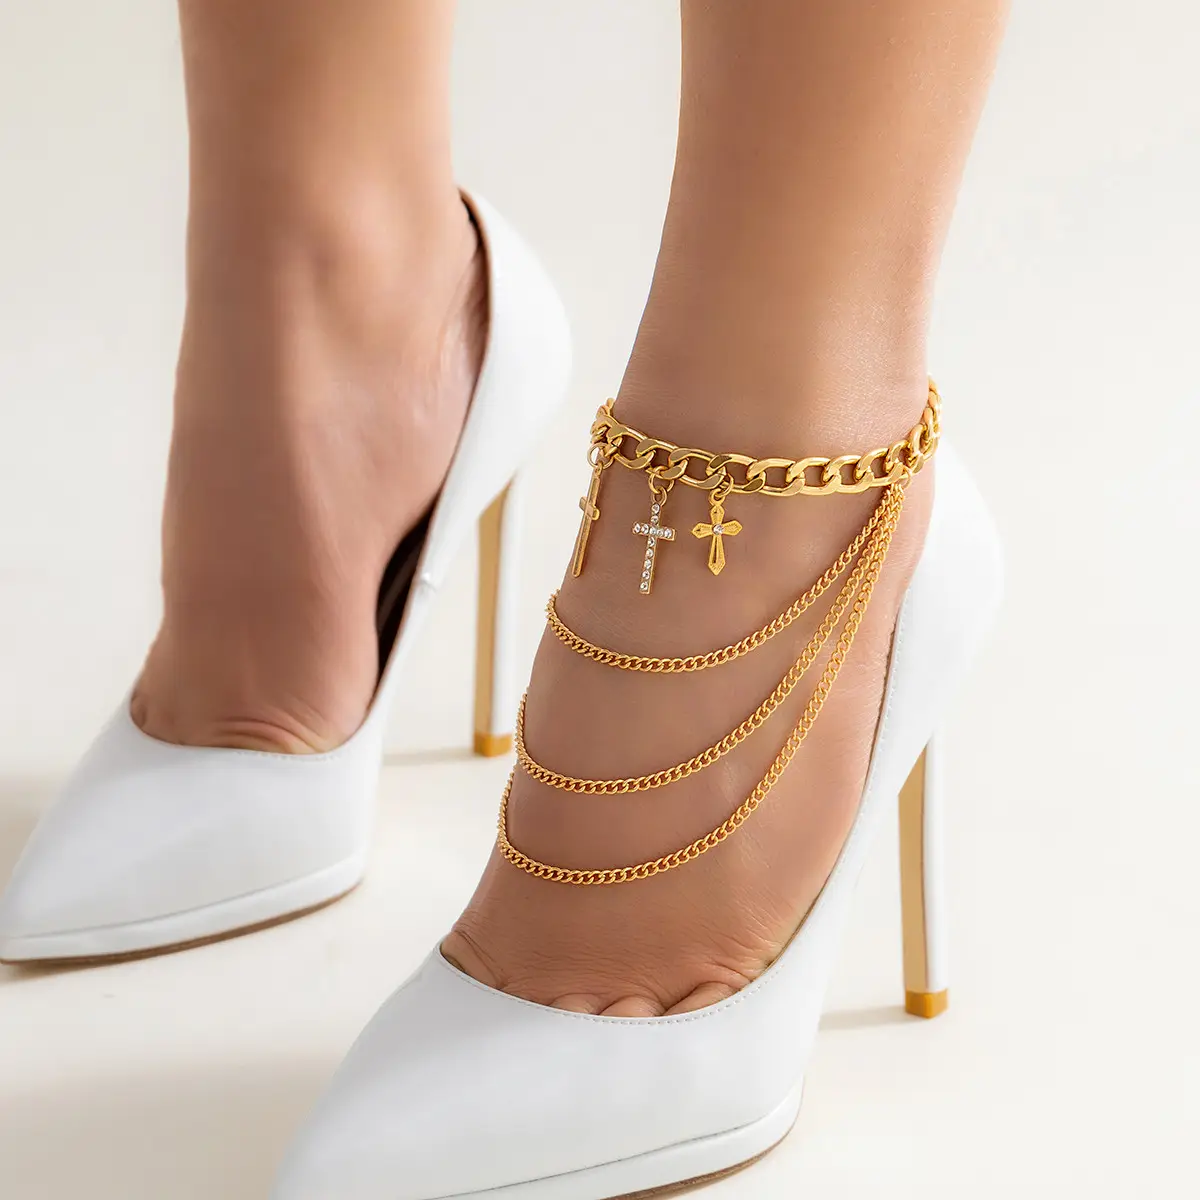 SHIXIN 1PC Multilayer Jesus Cross Pendant Tassel Chain Anklets High Heel Shoe Ankle Barefoot Sandals Sexy Foot Party Jewelry